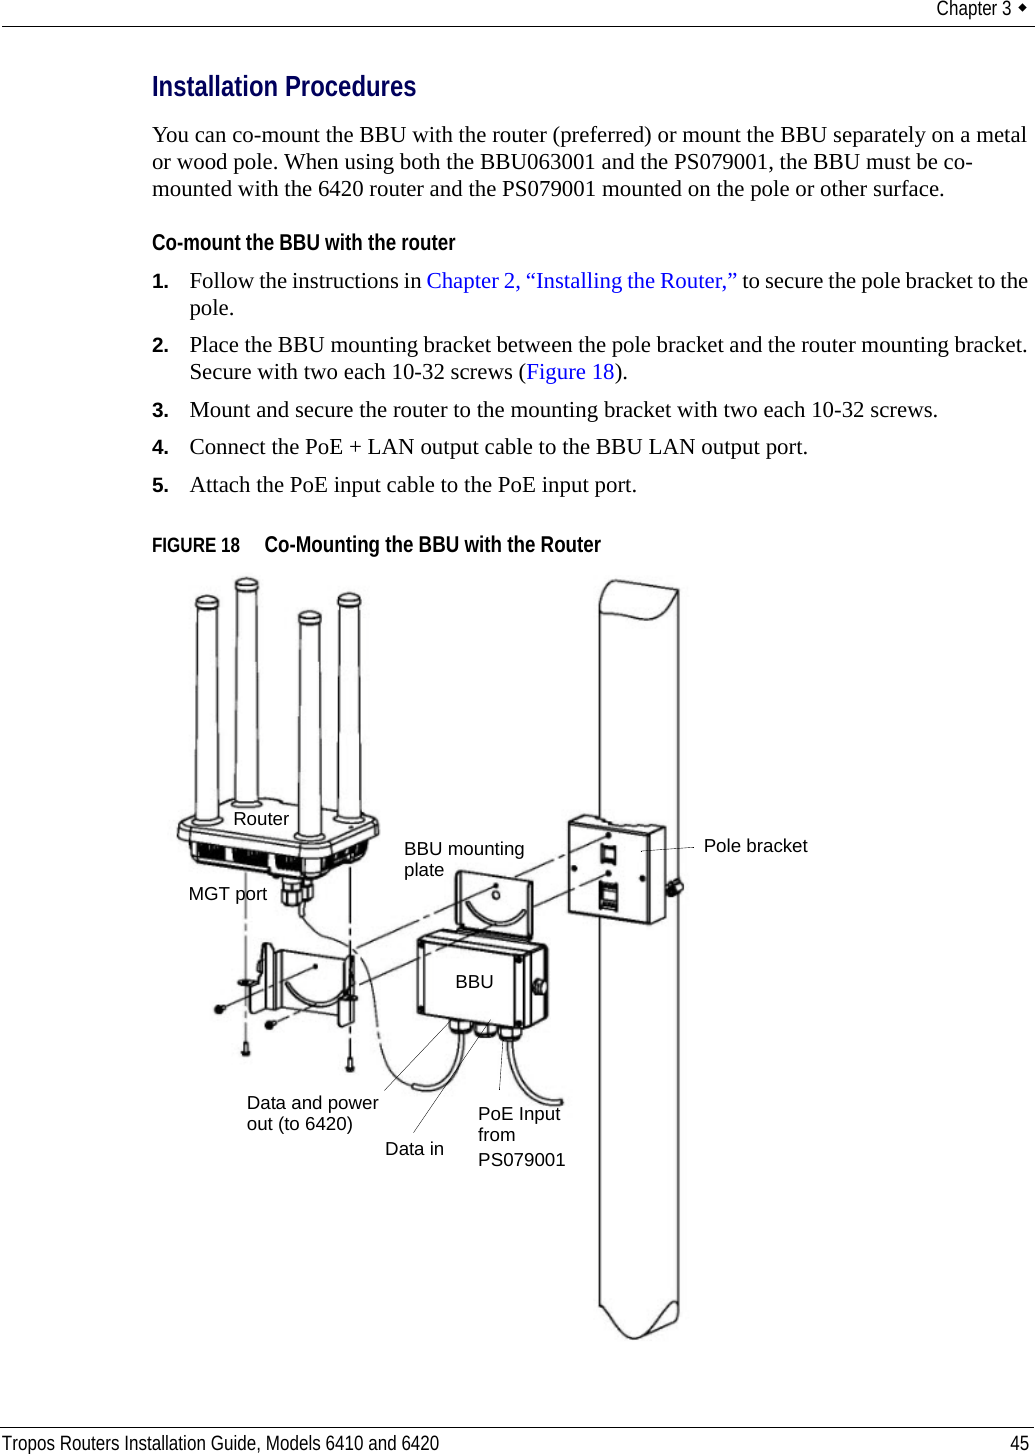 Chapter 3  Tropos Routers Installation Guide, Models 6410 and 6420 45Installation ProceduresYou can co-mount the BBU with the router (preferred) or mount the BBU separately on a metal or wood pole. When using both the BBU063001 and the PS079001, the BBU must be co-mounted with the 6420 router and the PS079001 mounted on the pole or other surface.Co-mount the BBU with the router1. Follow the instructions in Chapter 2, “Installing the Router,” to secure the pole bracket to the pole.2. Place the BBU mounting bracket between the pole bracket and the router mounting bracket. Secure with two each 10-32 screws (Figure 18).3. Mount and secure the router to the mounting bracket with two each 10-32 screws.4. Connect the PoE + LAN output cable to the BBU LAN output port.5. Attach the PoE input cable to the PoE input port.FIGURE 18   Co-Mounting the BBU with the RouterBBU mountingPoE InputMGT portRouterplateBBUfrom PS079001Data and powerData inout (to 6420)Pole bracket